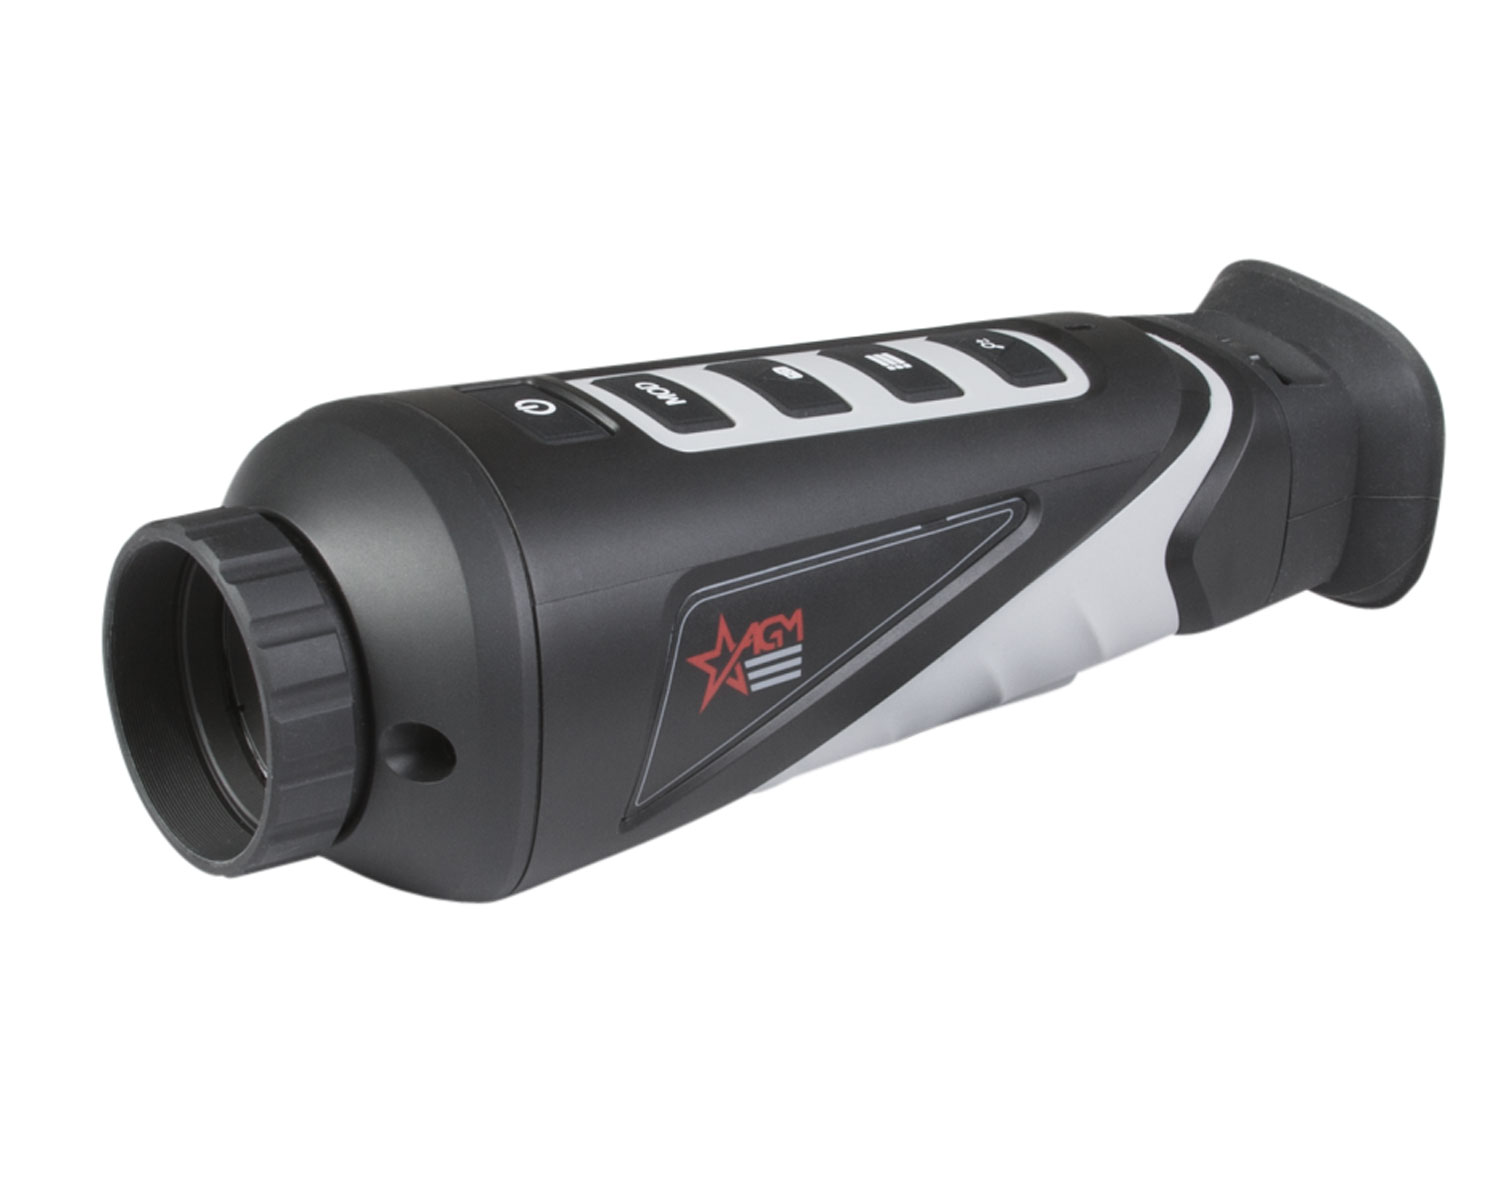 AGM Global Vision 3093451006AS31 ASP TM35-384 Thermal Monocular Black/Gray 2.4x 35mm 384x288 Resolution Features Built in Flashlight